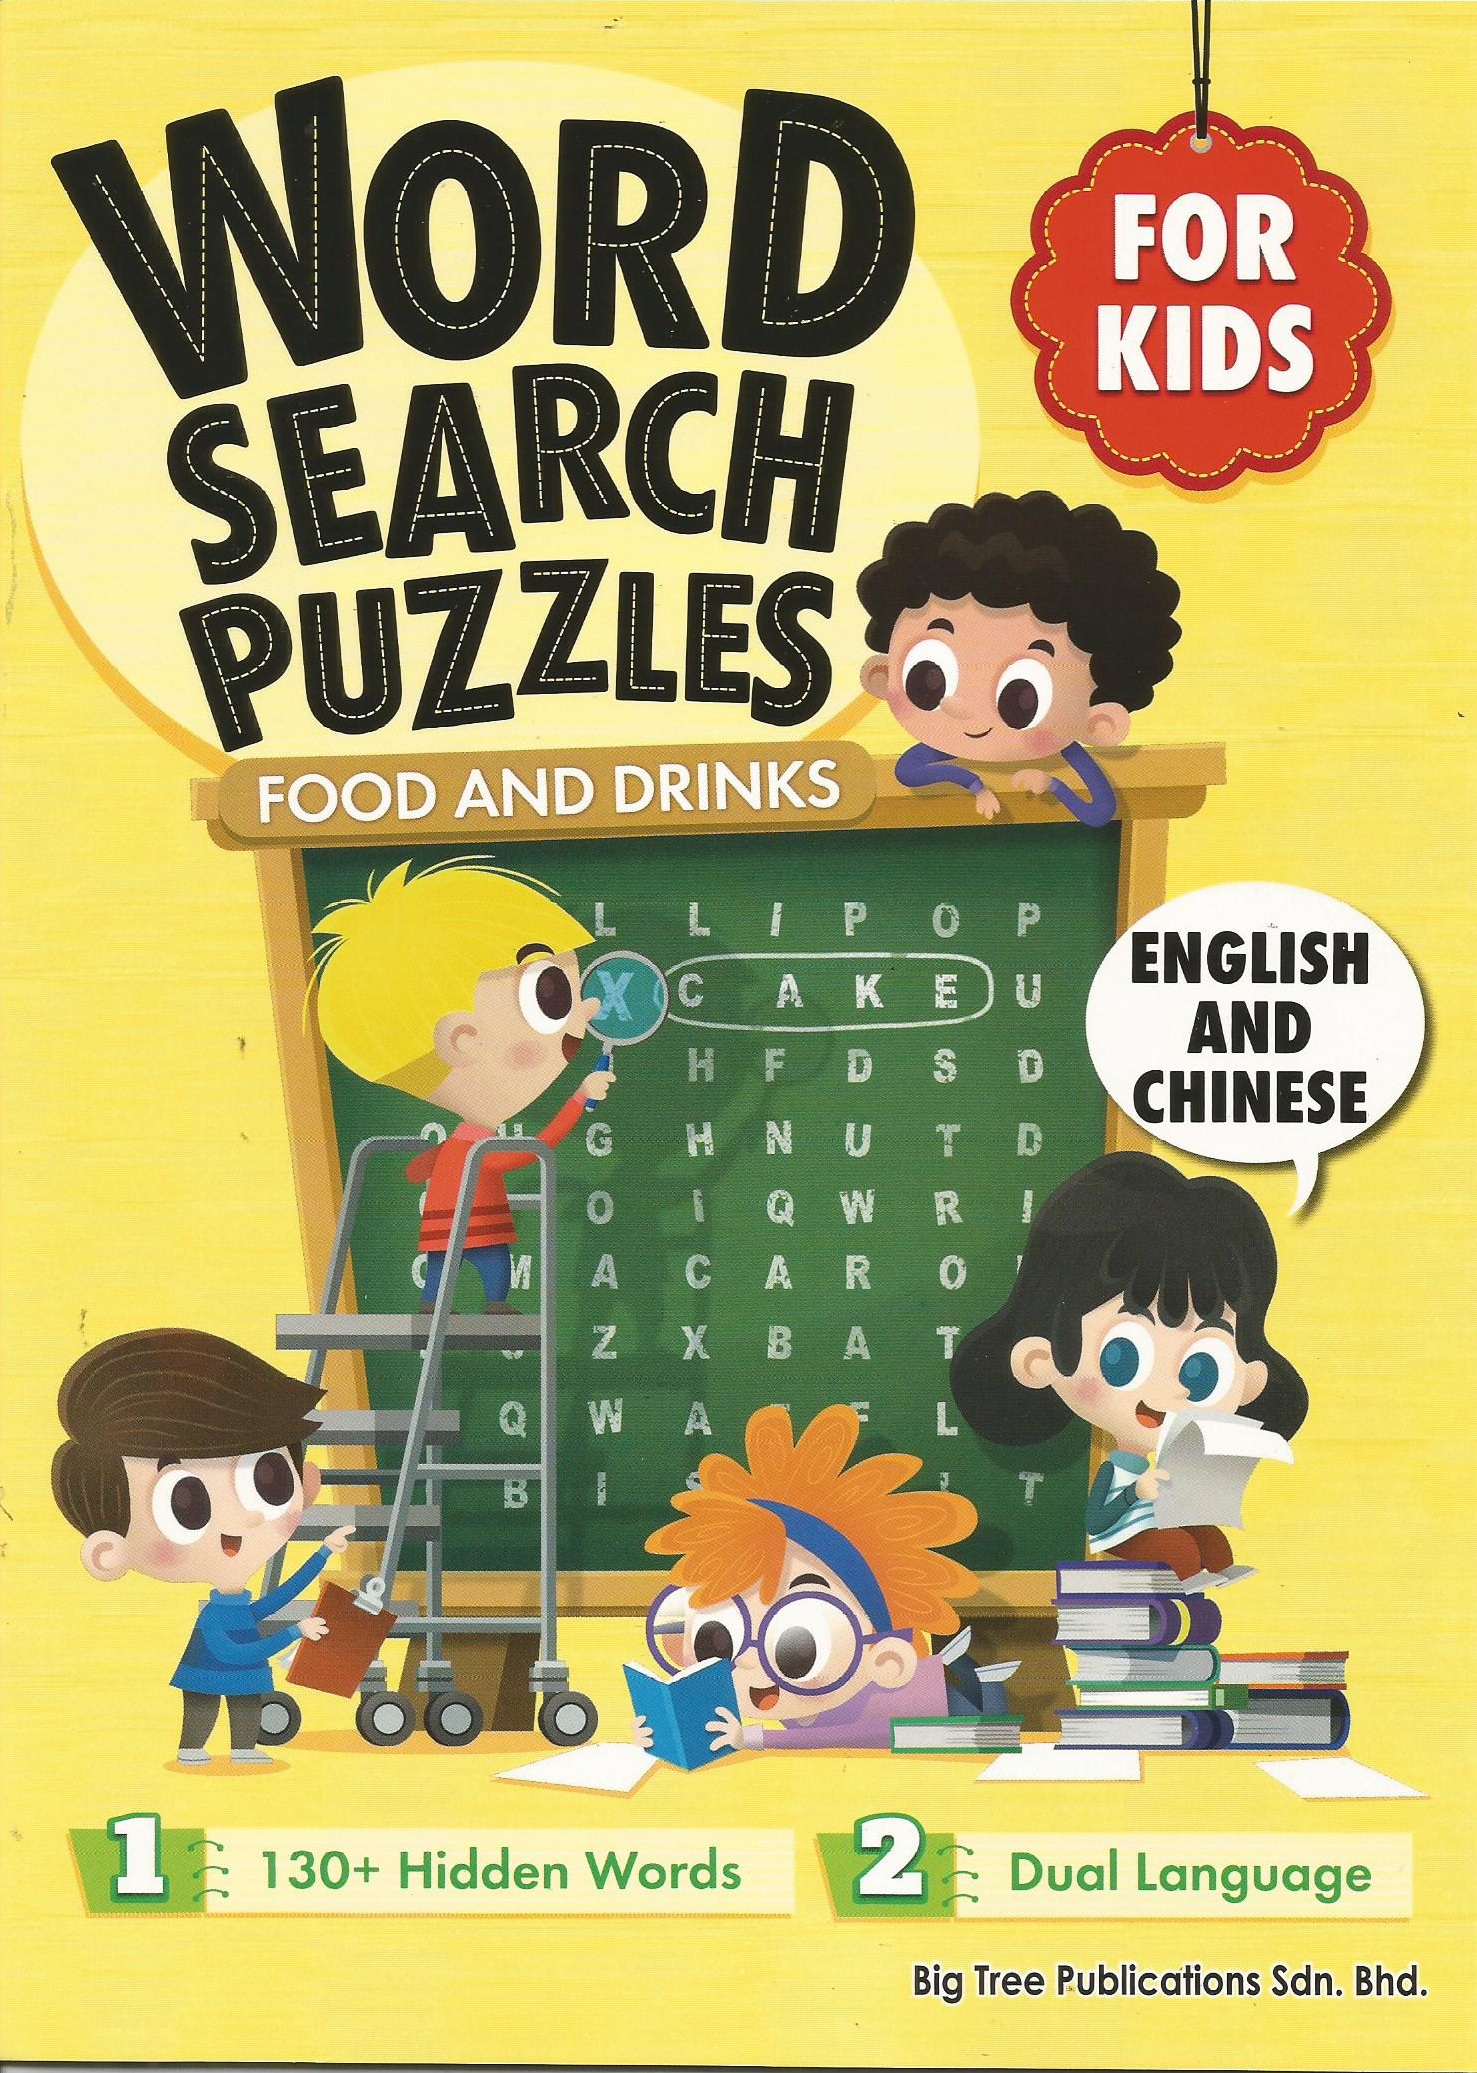 WORD  SEARCH  PUZZLES  (E/C)  (2)  (FOOD AND  DRINKS)